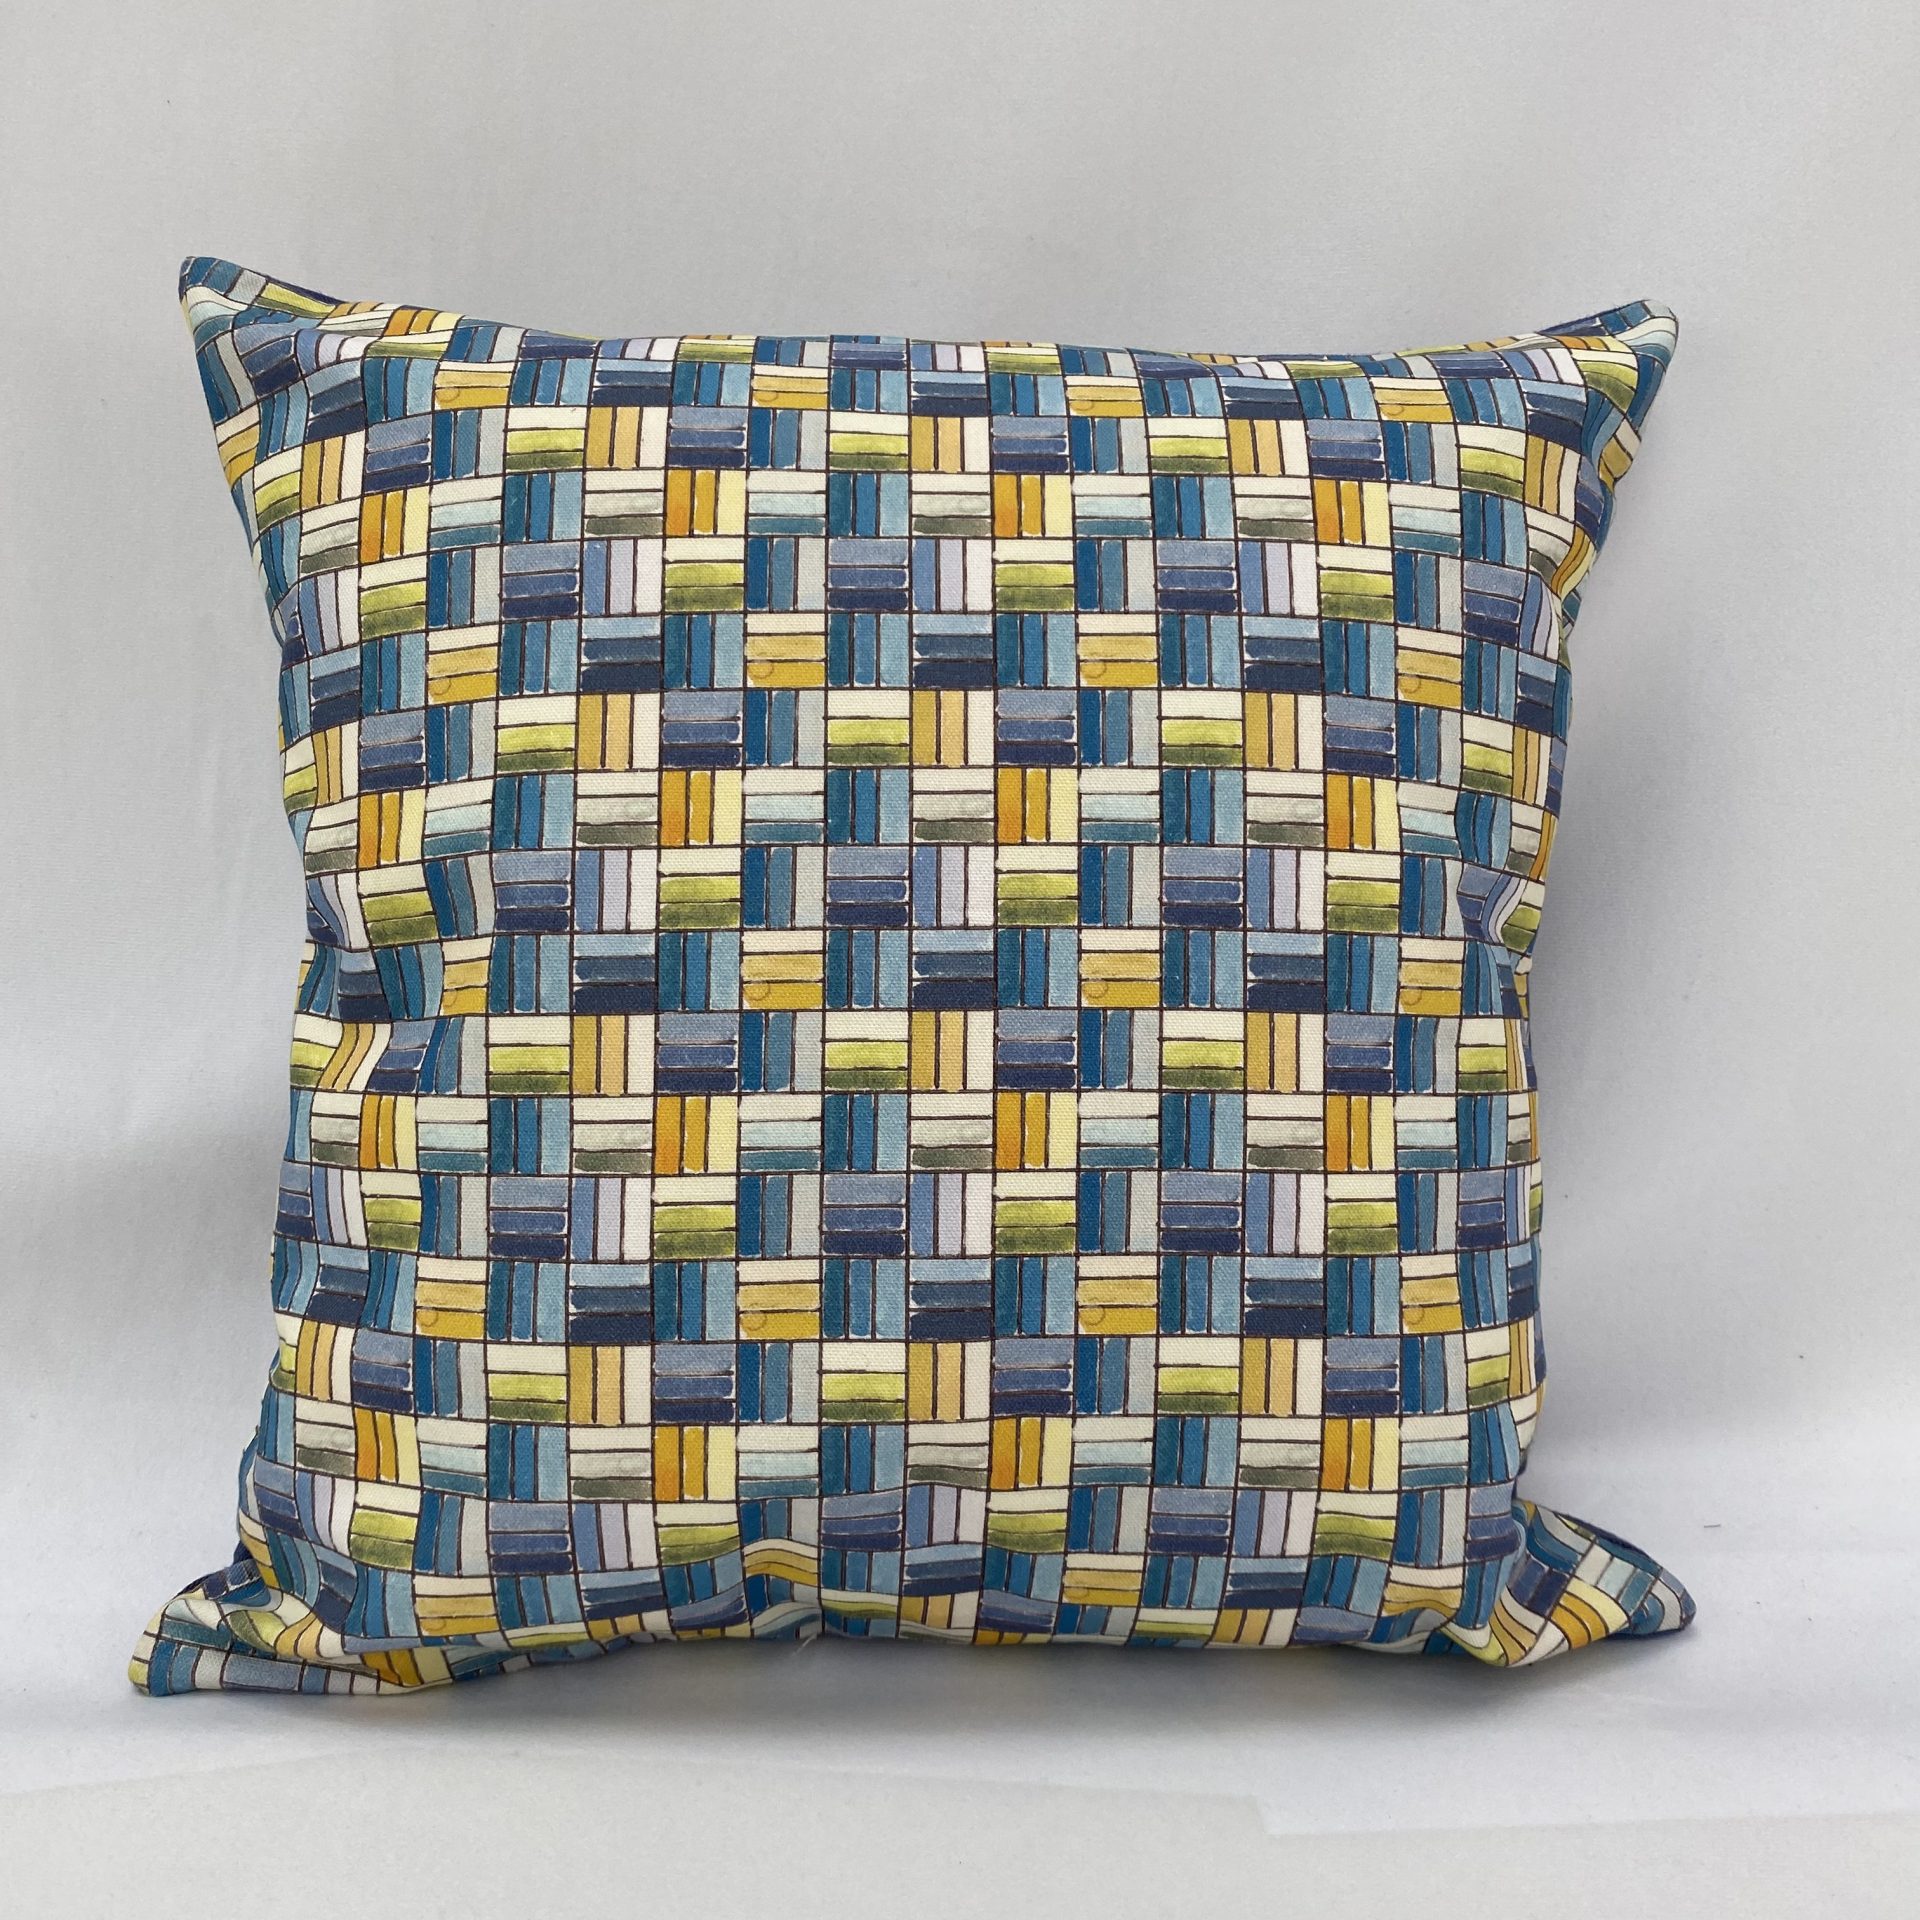 Digitaly printed textile cushion by Paul Bristow's